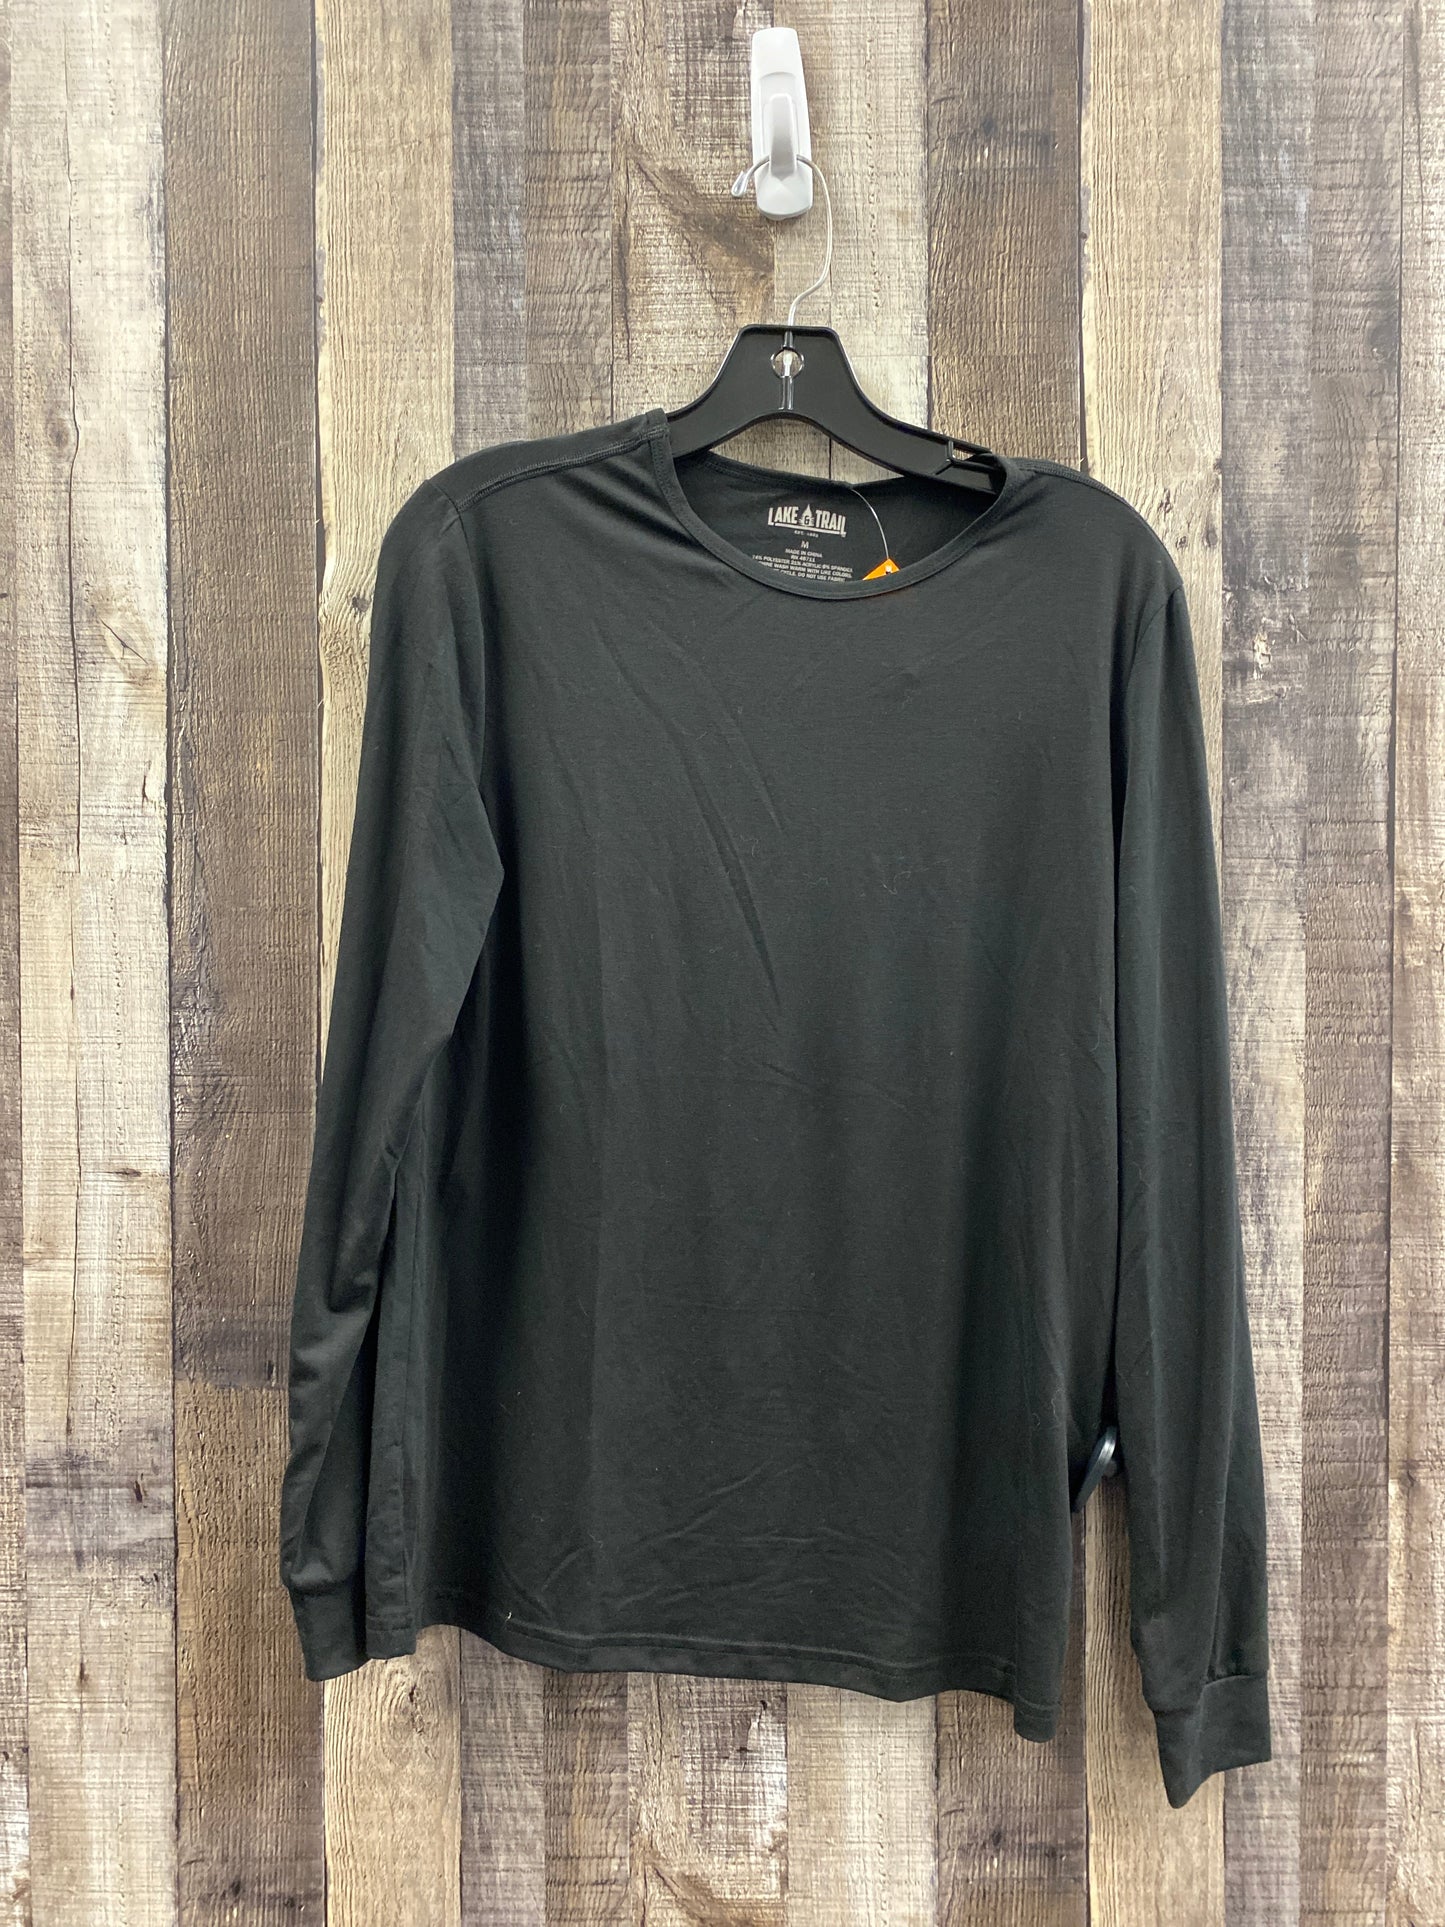 Athletic Top Long Sleeve Crewneck By Cme  Size: M